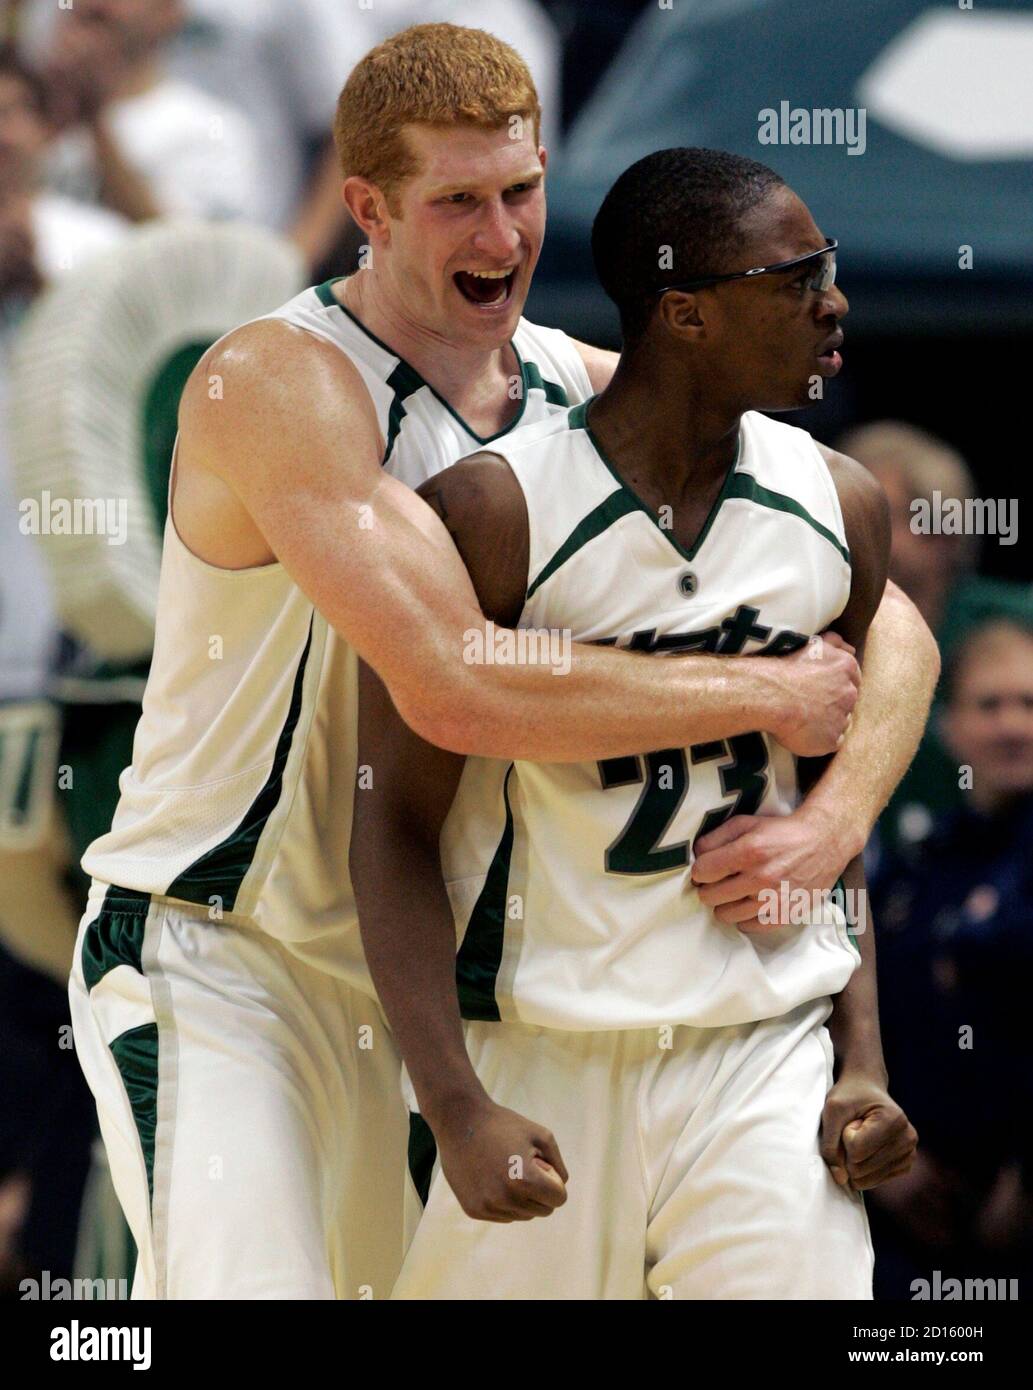 Michigan State's center Drew Naymick (L) and guard Maurice Joseph celebrate during the final minutes of their NCAA basketball game against Wisconsin Badgers in East Lansing, Michigan February 20, 2007.  REUTERS/Rebecca Cook  (UNITED STATES) Stock Photo